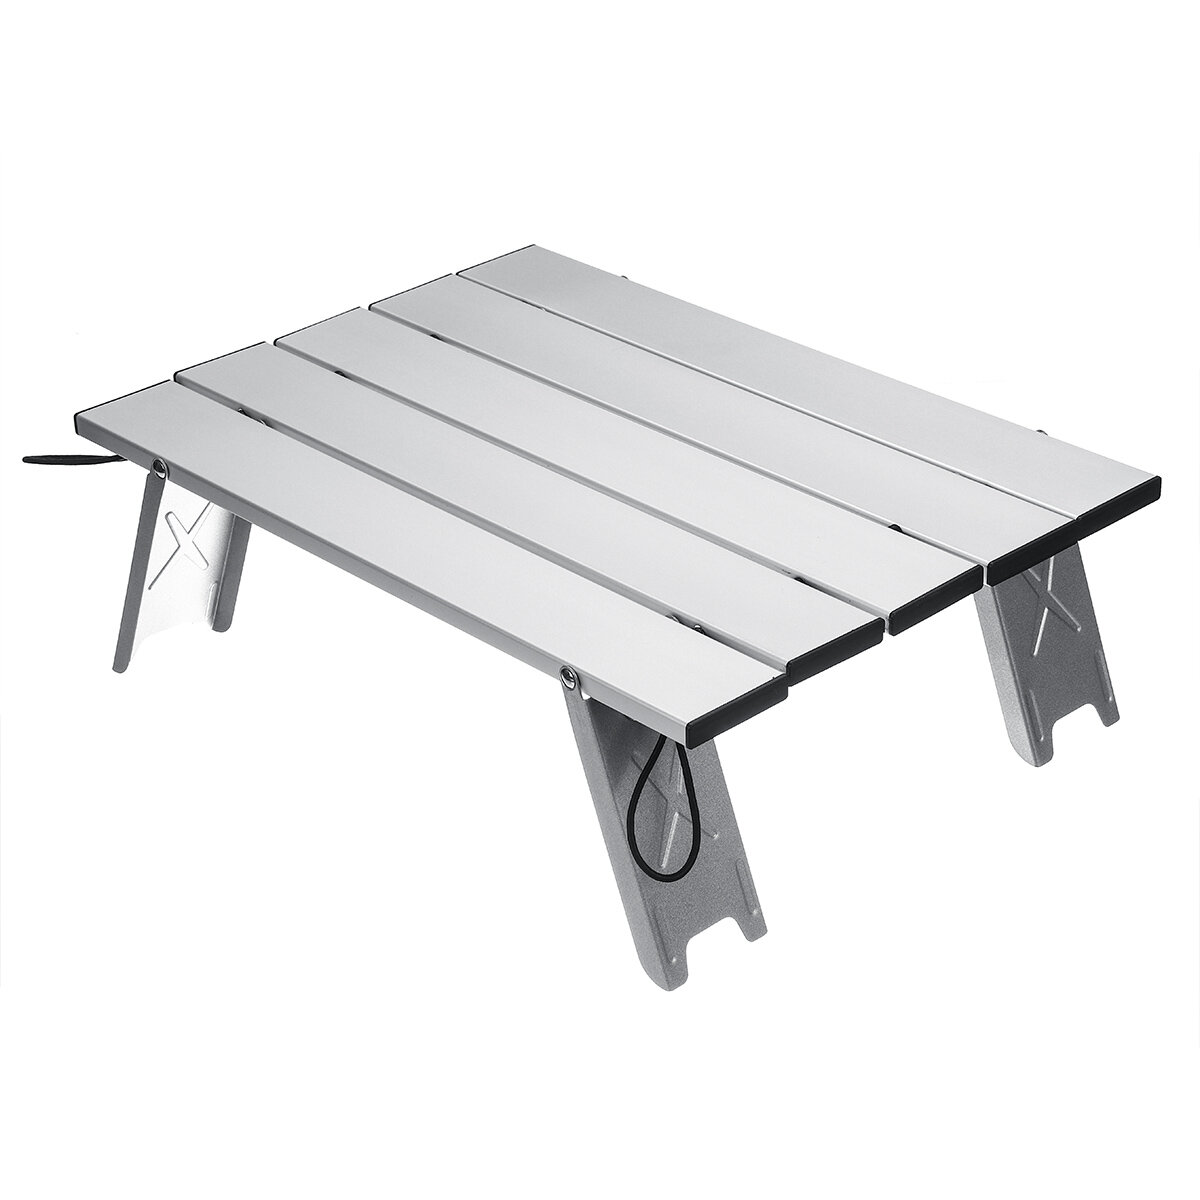 Portable Outdoor Folding Table Chair Camping Aluminium Alloy Picnic Table Waterproof Ultra-light Durable Table 40x29x12c